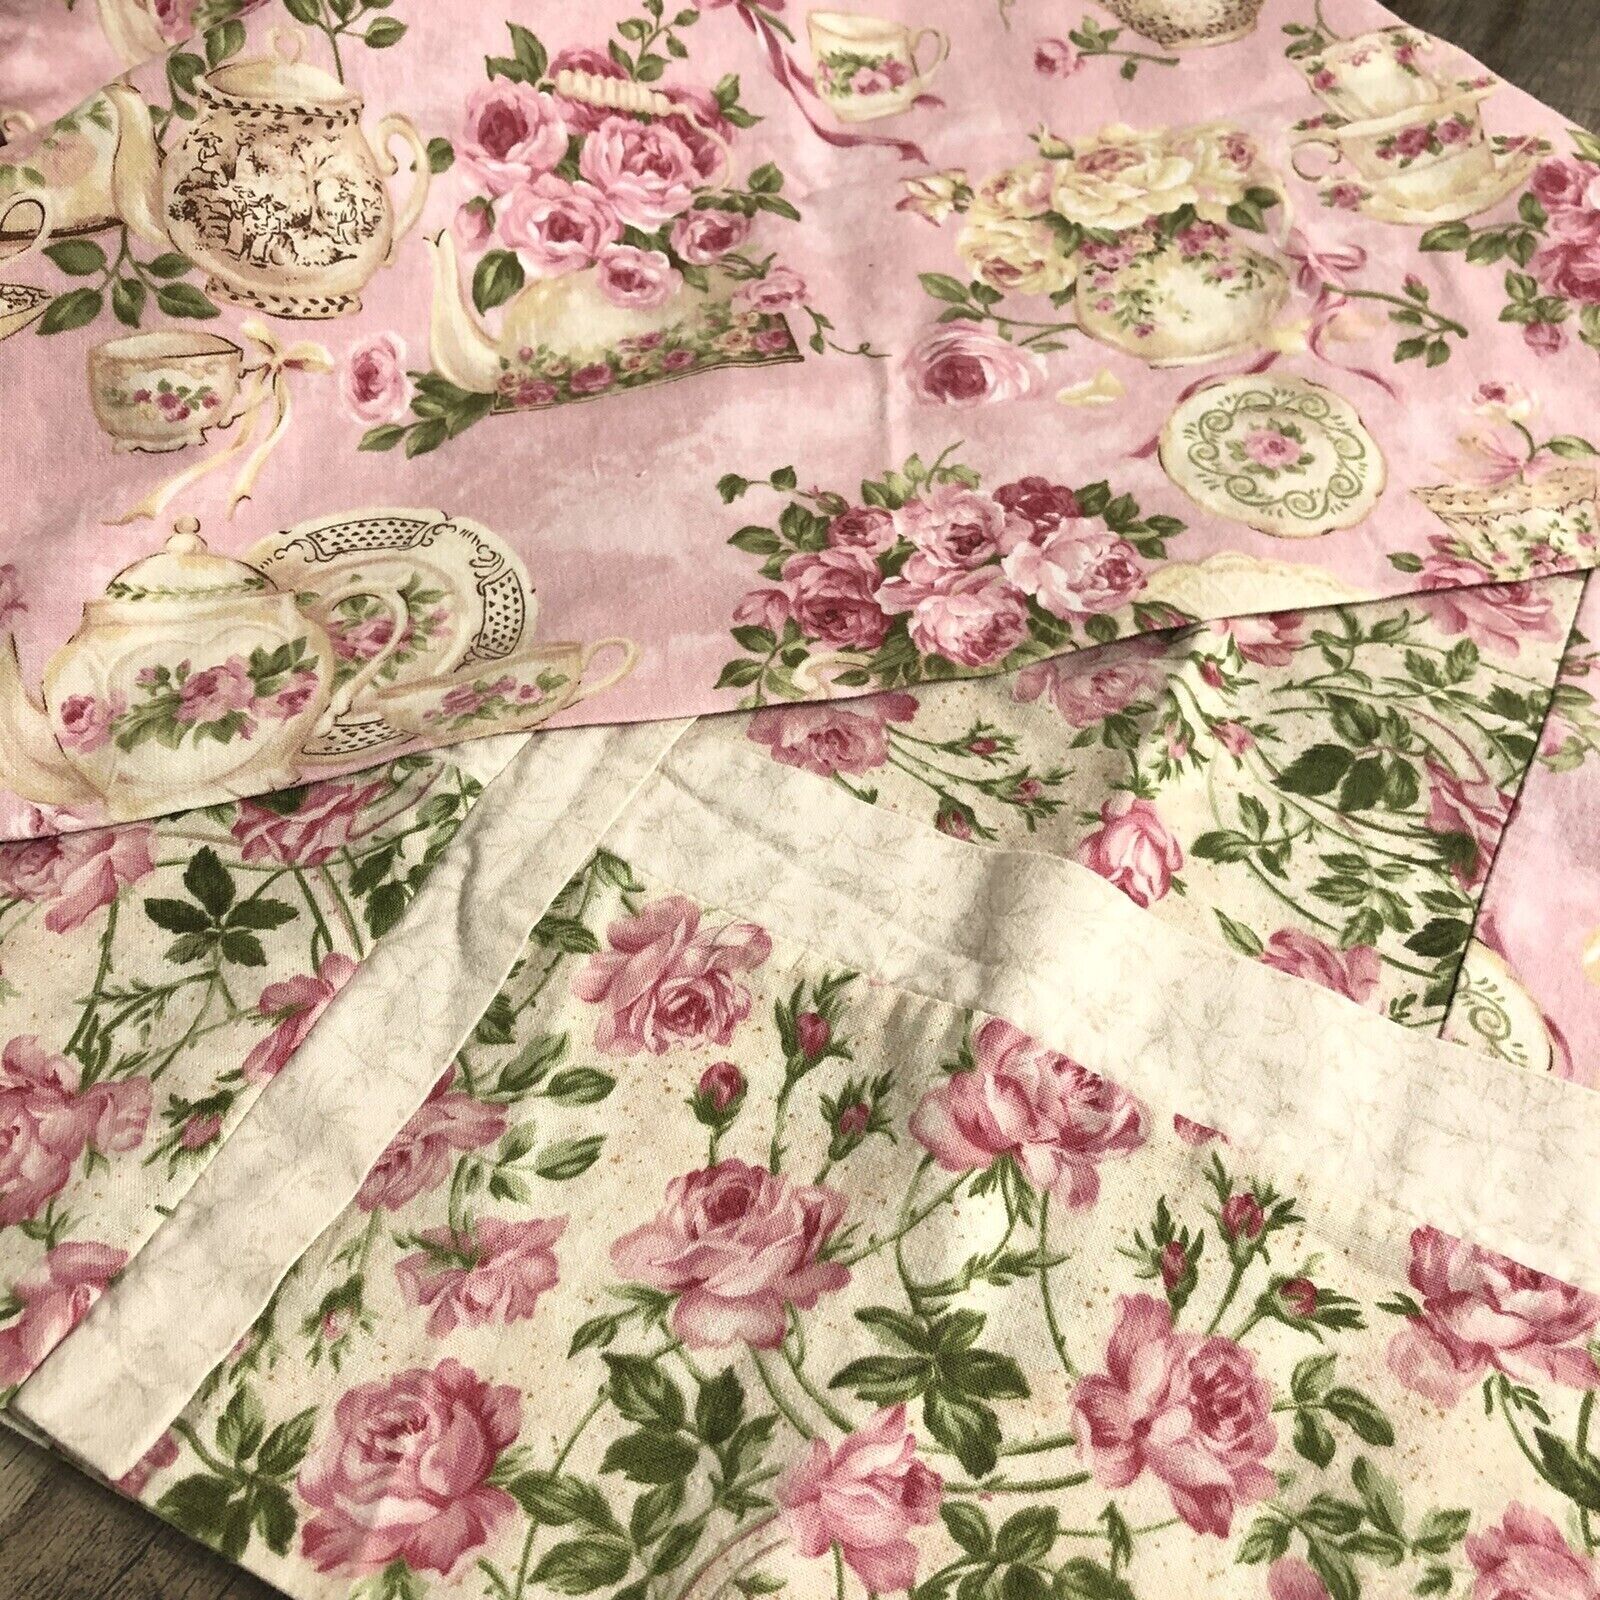 Shabby Cottage Floral Pink Roses Teapots Handmade Cotton (1) Standard Pillowcase